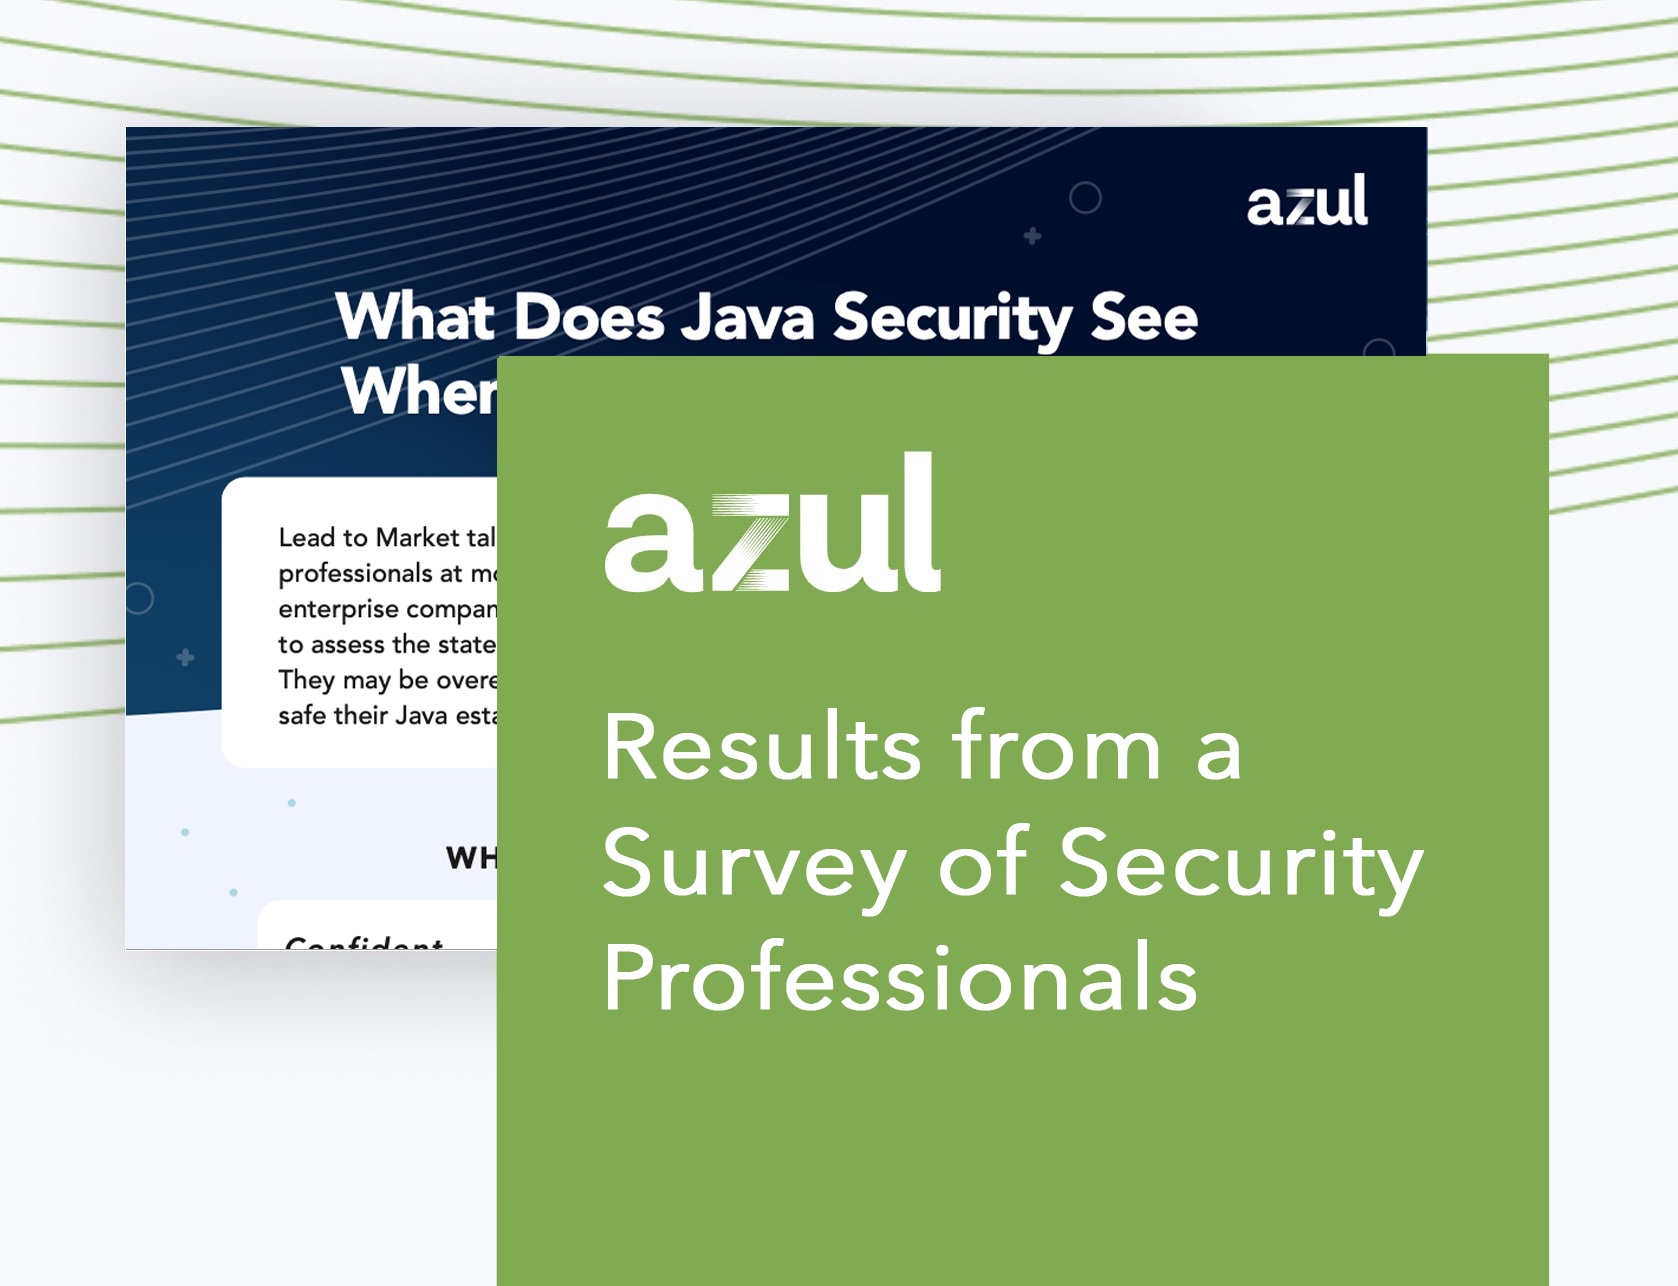 Results from a Survey of Security Professionals